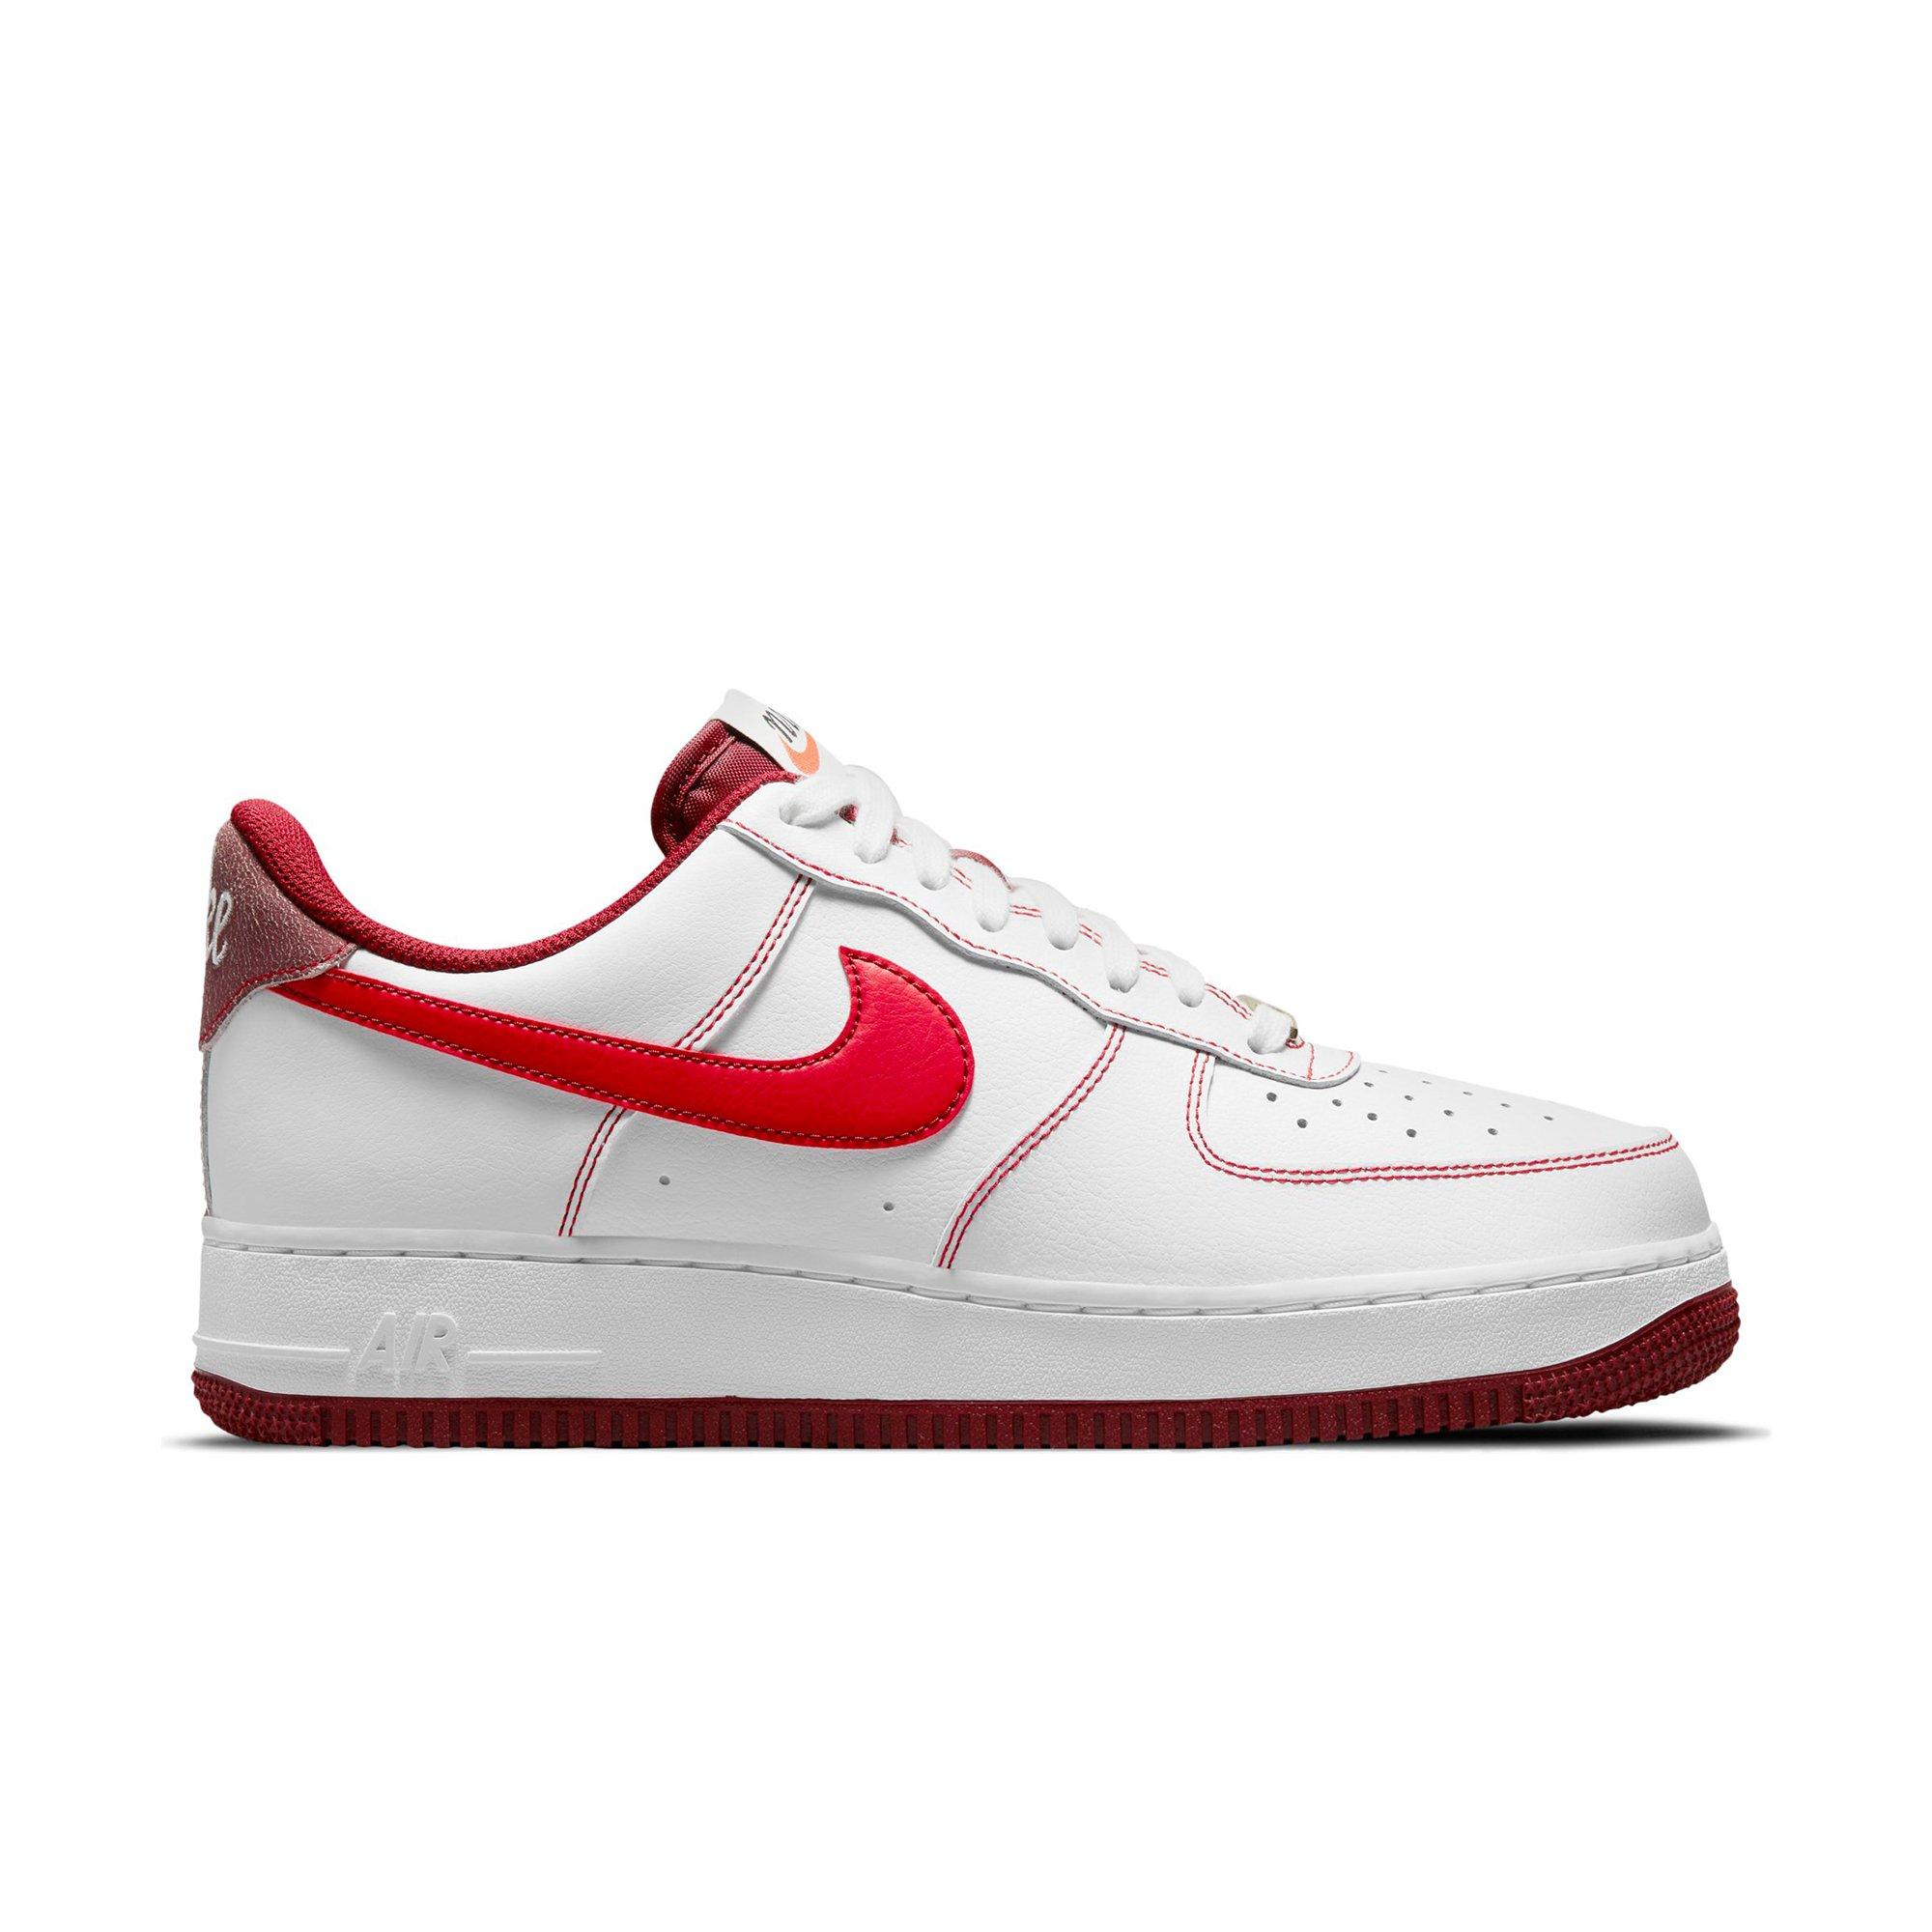 Nike Air Force 1 07 Mens Lifestyle Shoes White Red CZ0326-100 – Shoe Palace